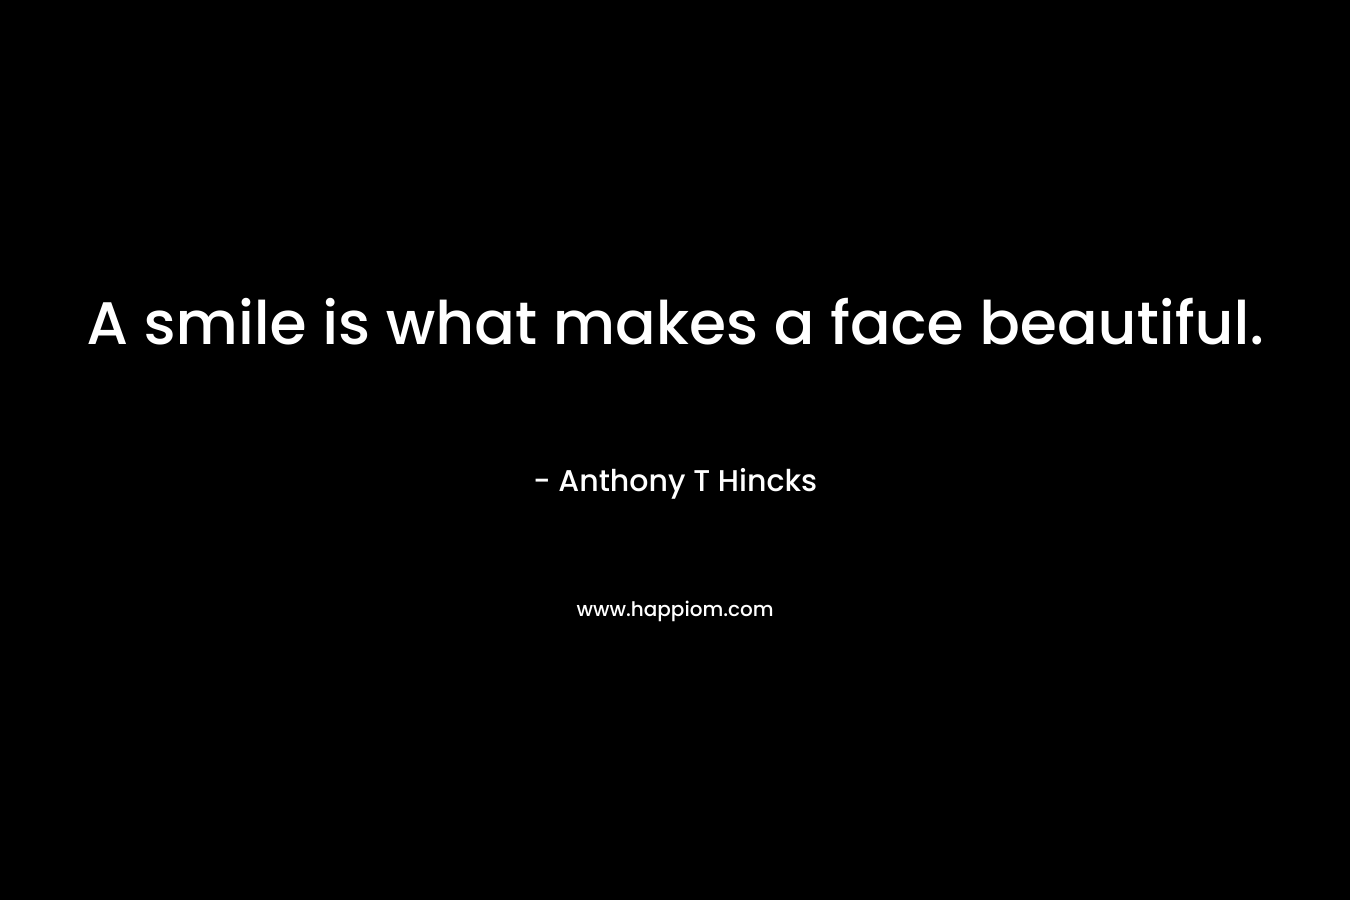 A smile is what makes a face beautiful.